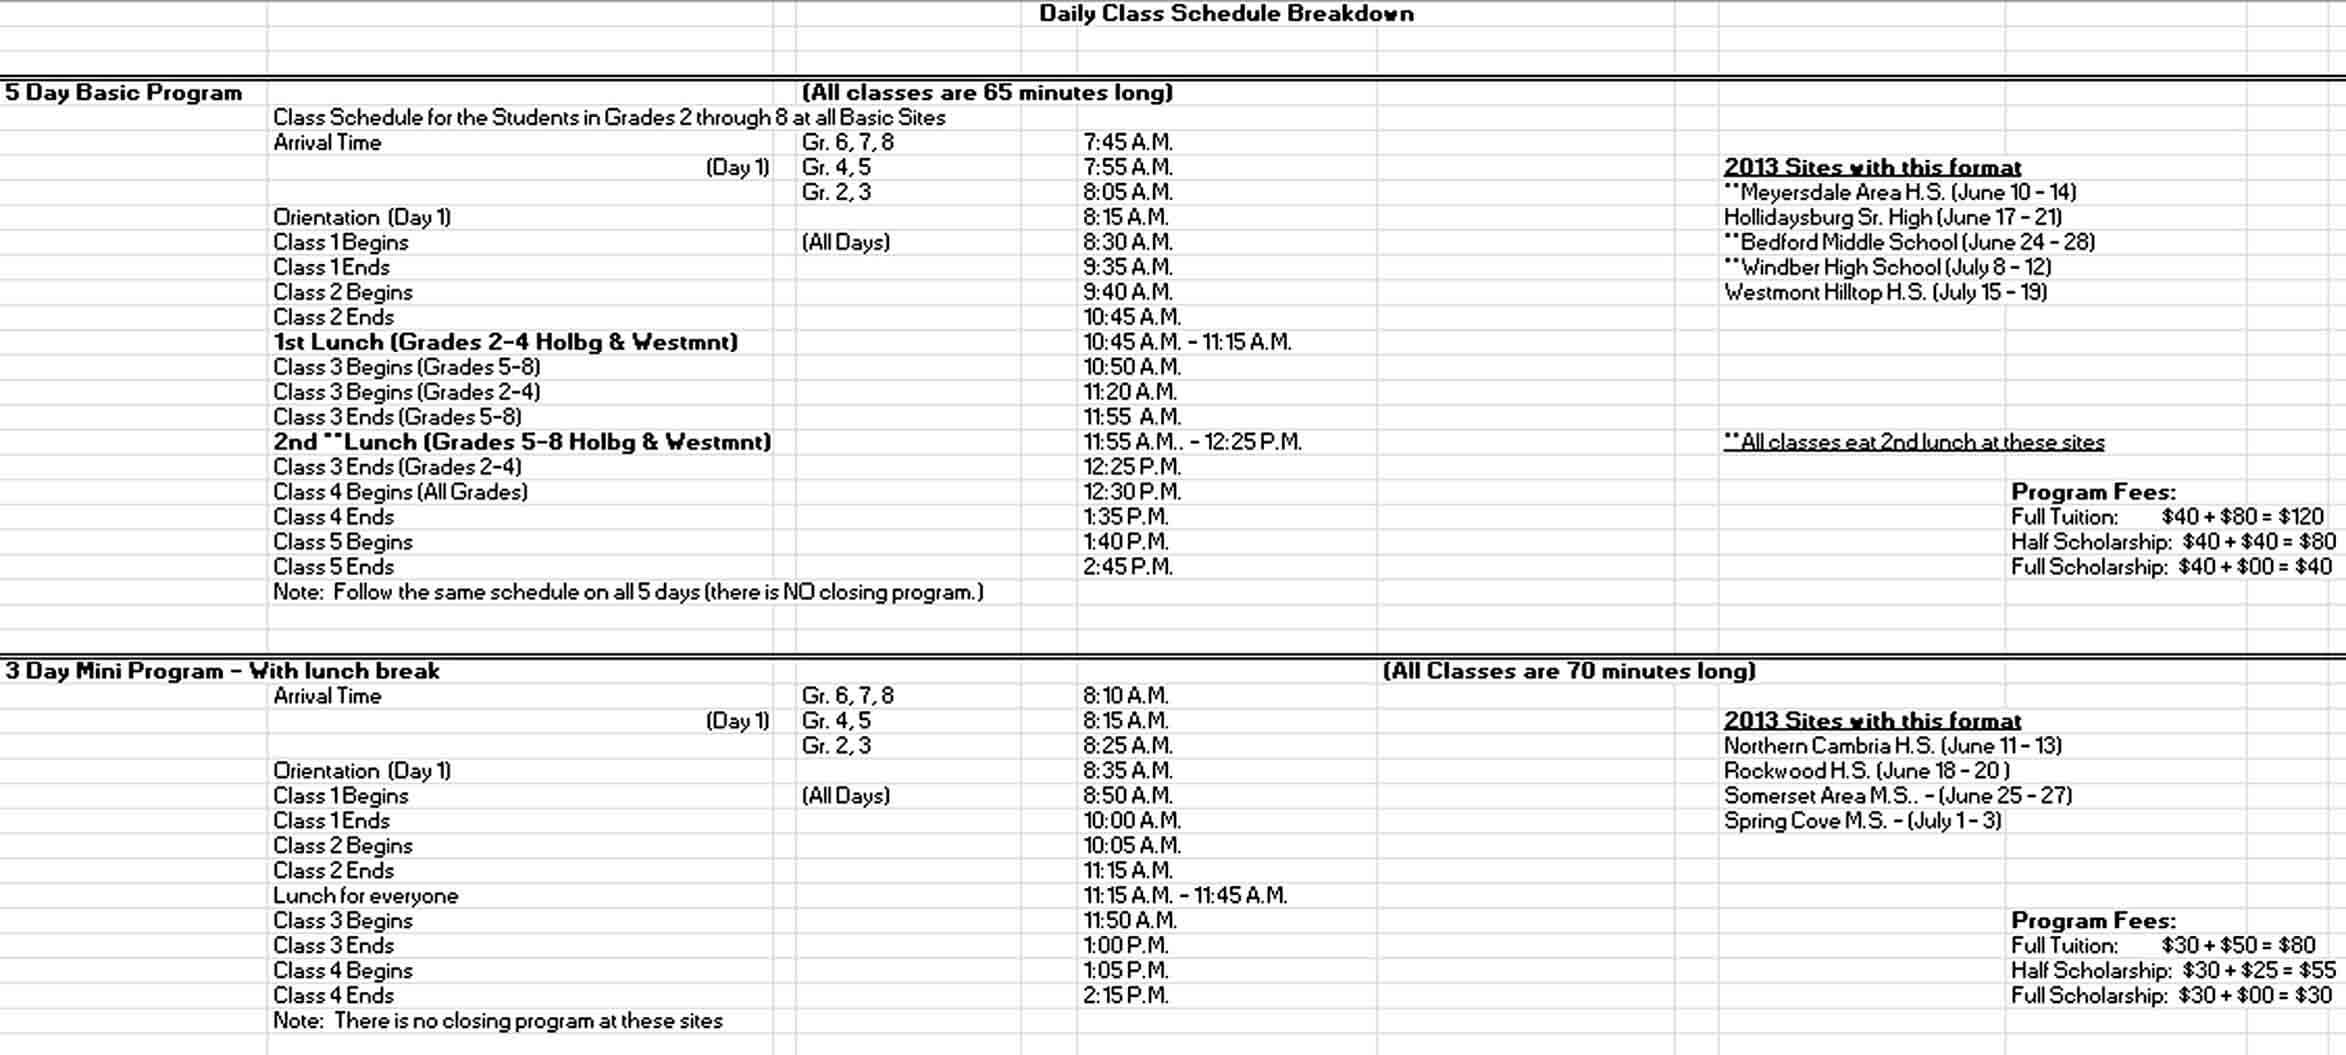 Daily Class Schedule Template Excel